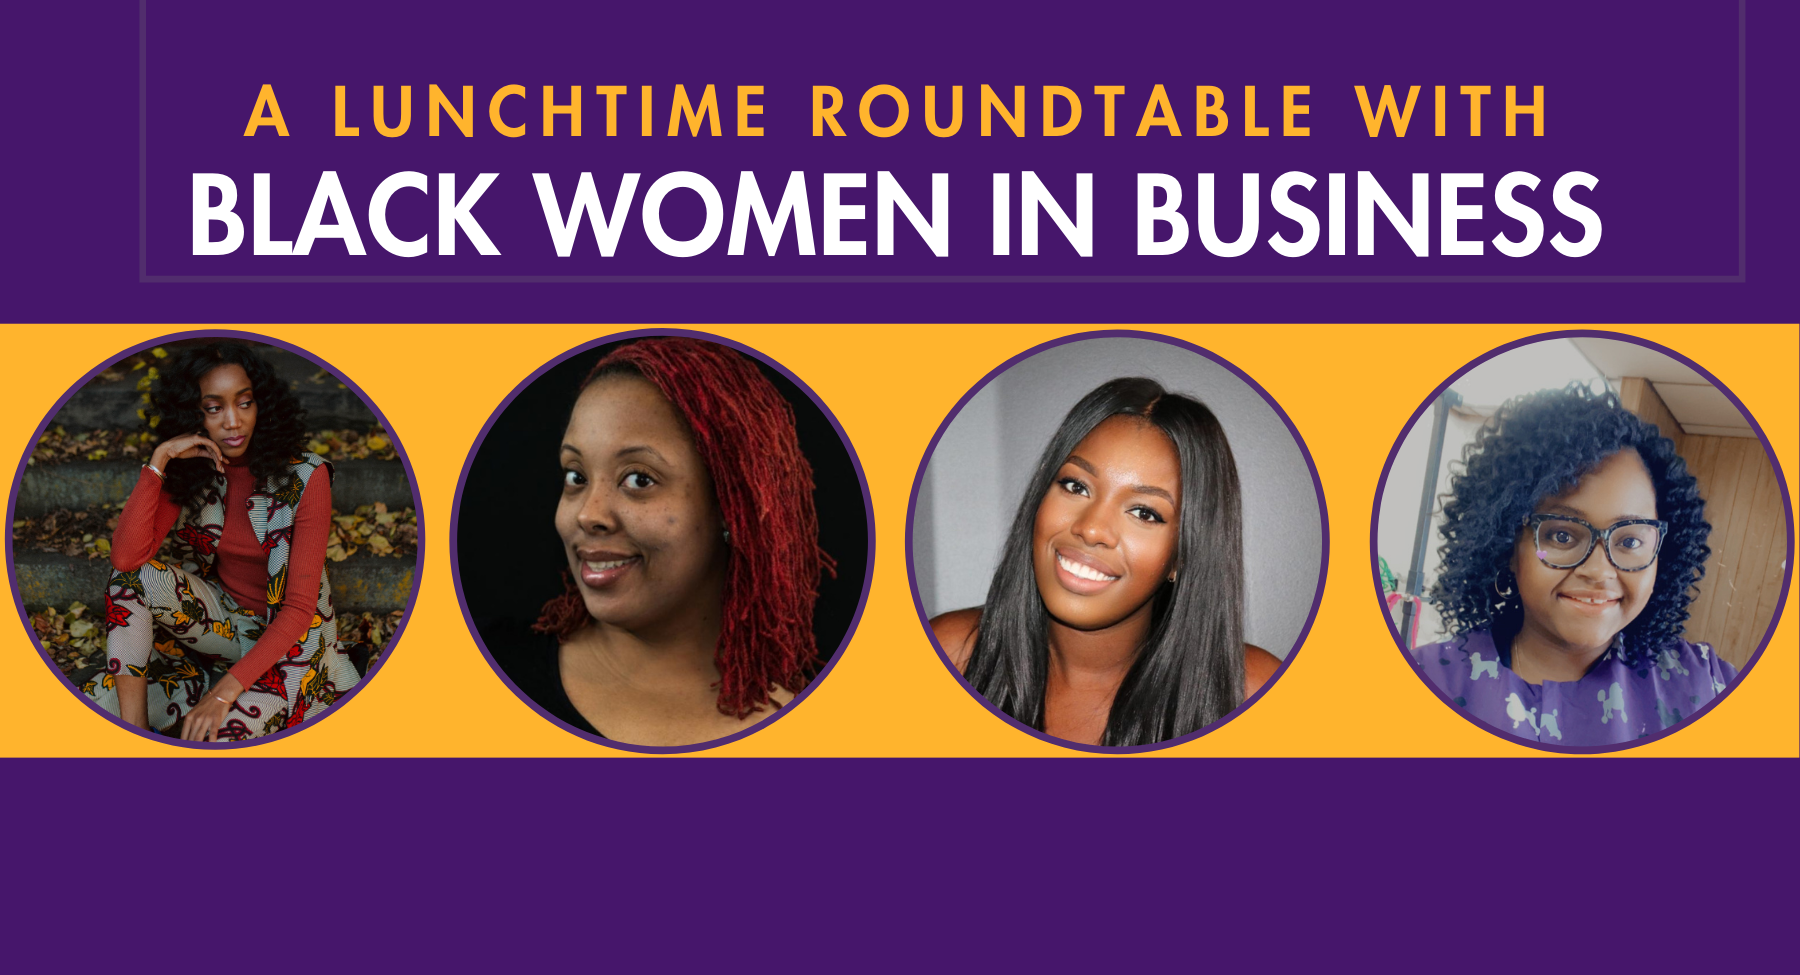 University to Host Lunchtime Roundtable with Black Women in Business